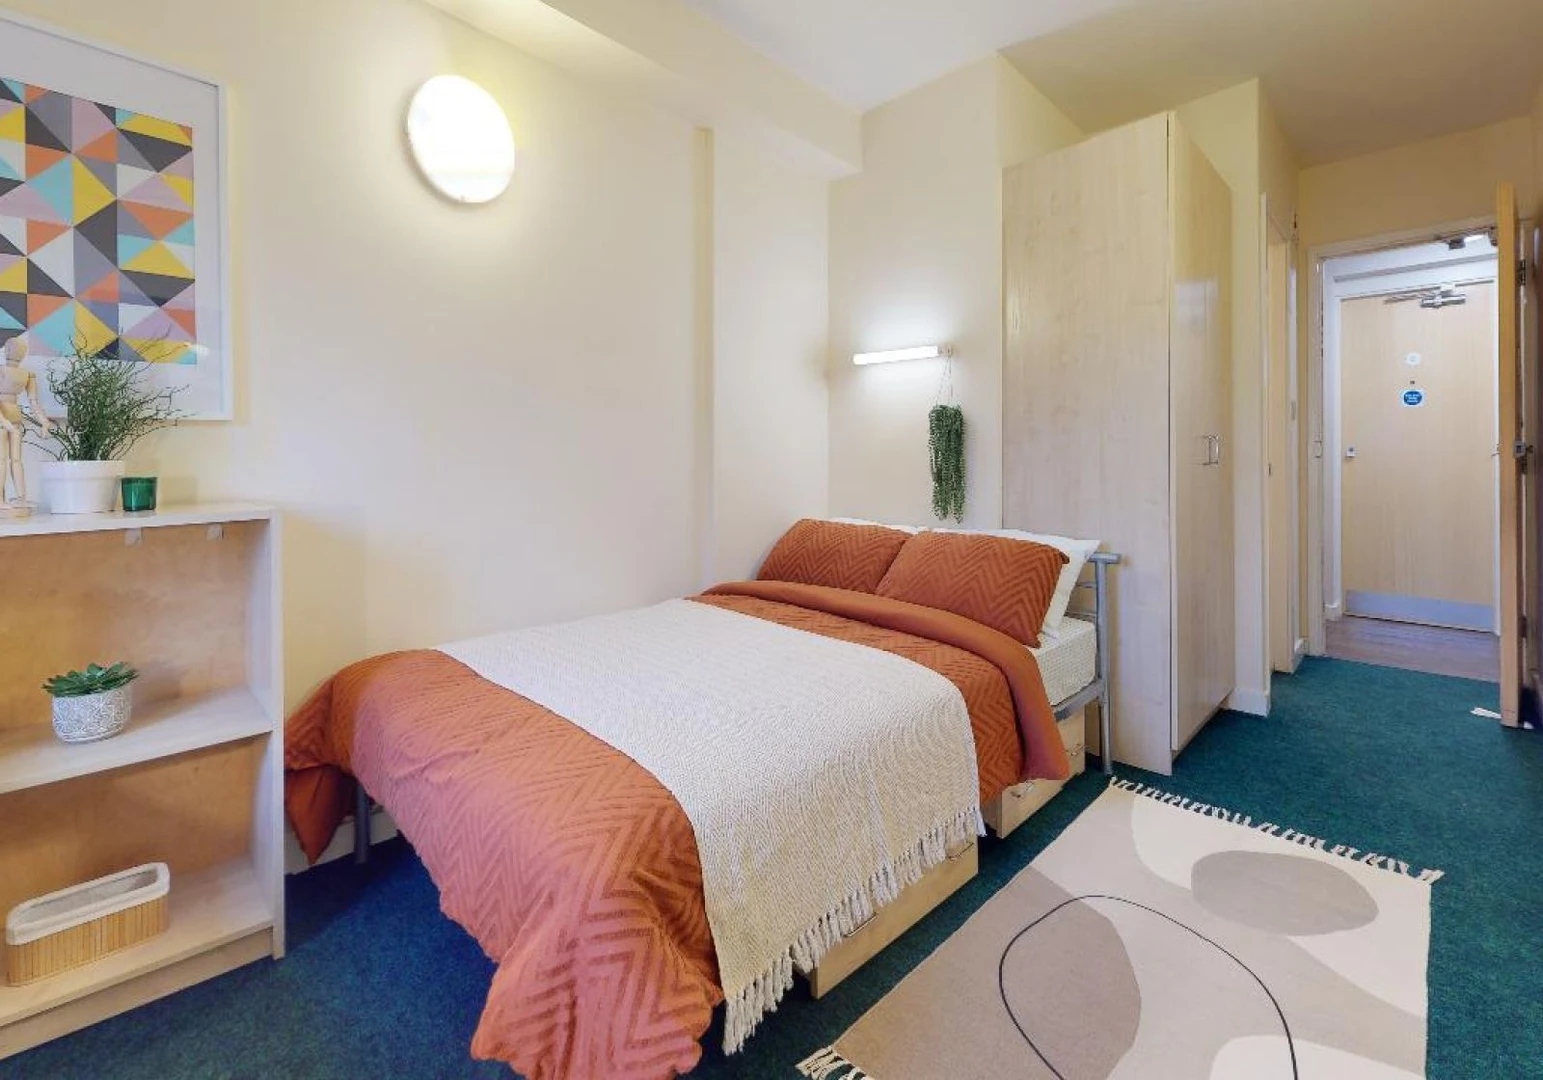 Renting rooms by the month in Huddersfield